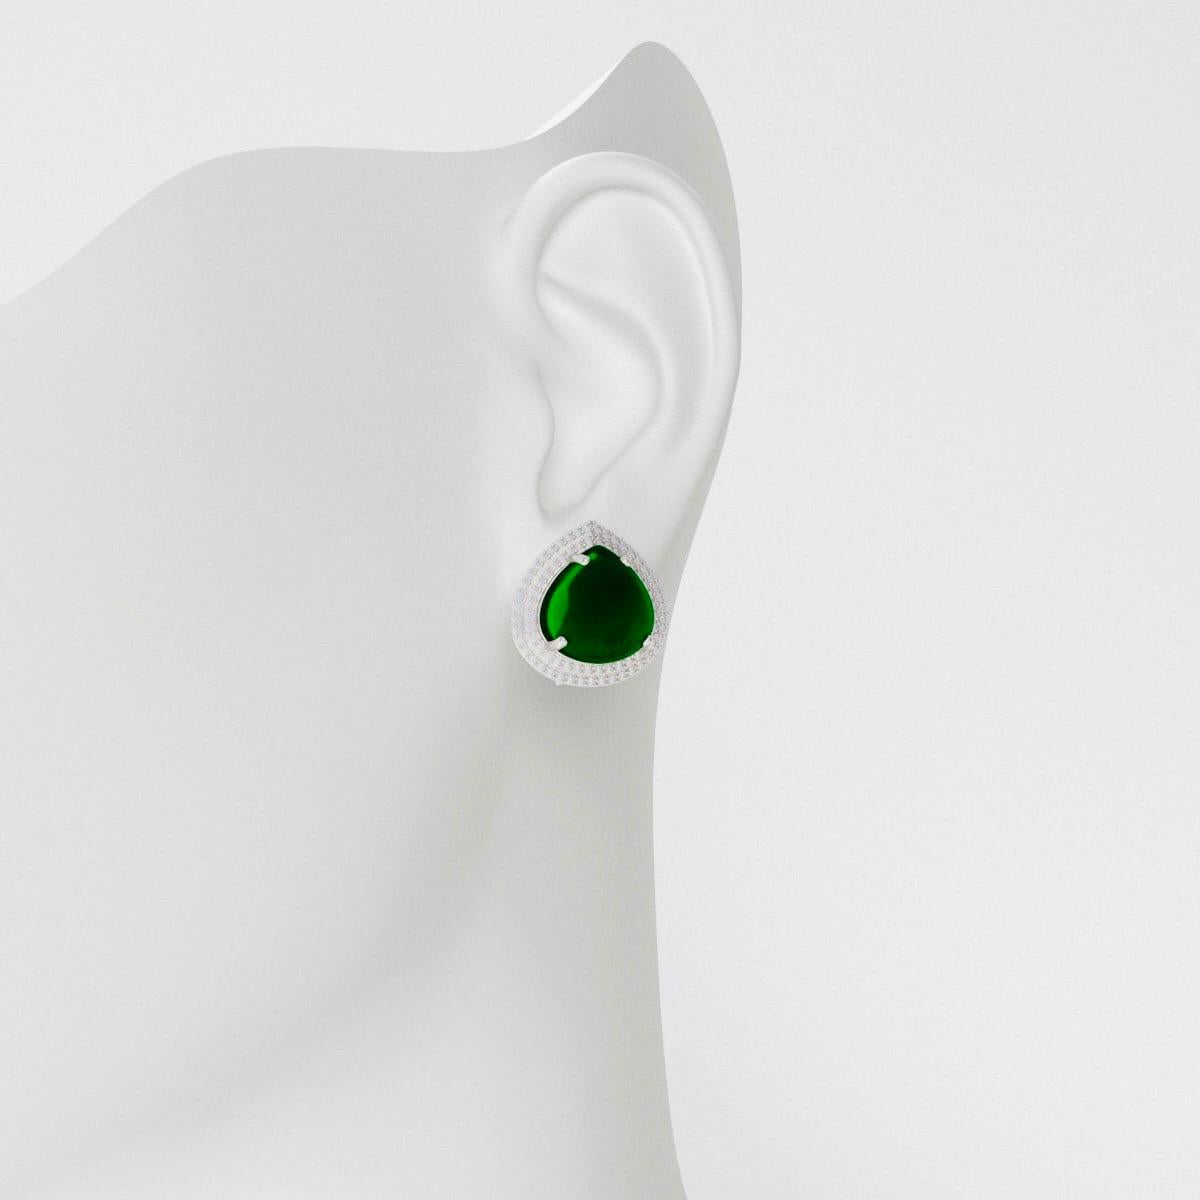 Gorgeous unique cut pear/heart  shape Cabochon Emeralds Cut specially for this design of immense rich green color and very clean plus totally eye clean. The emeralds are of Zambian origin and will be certified. 